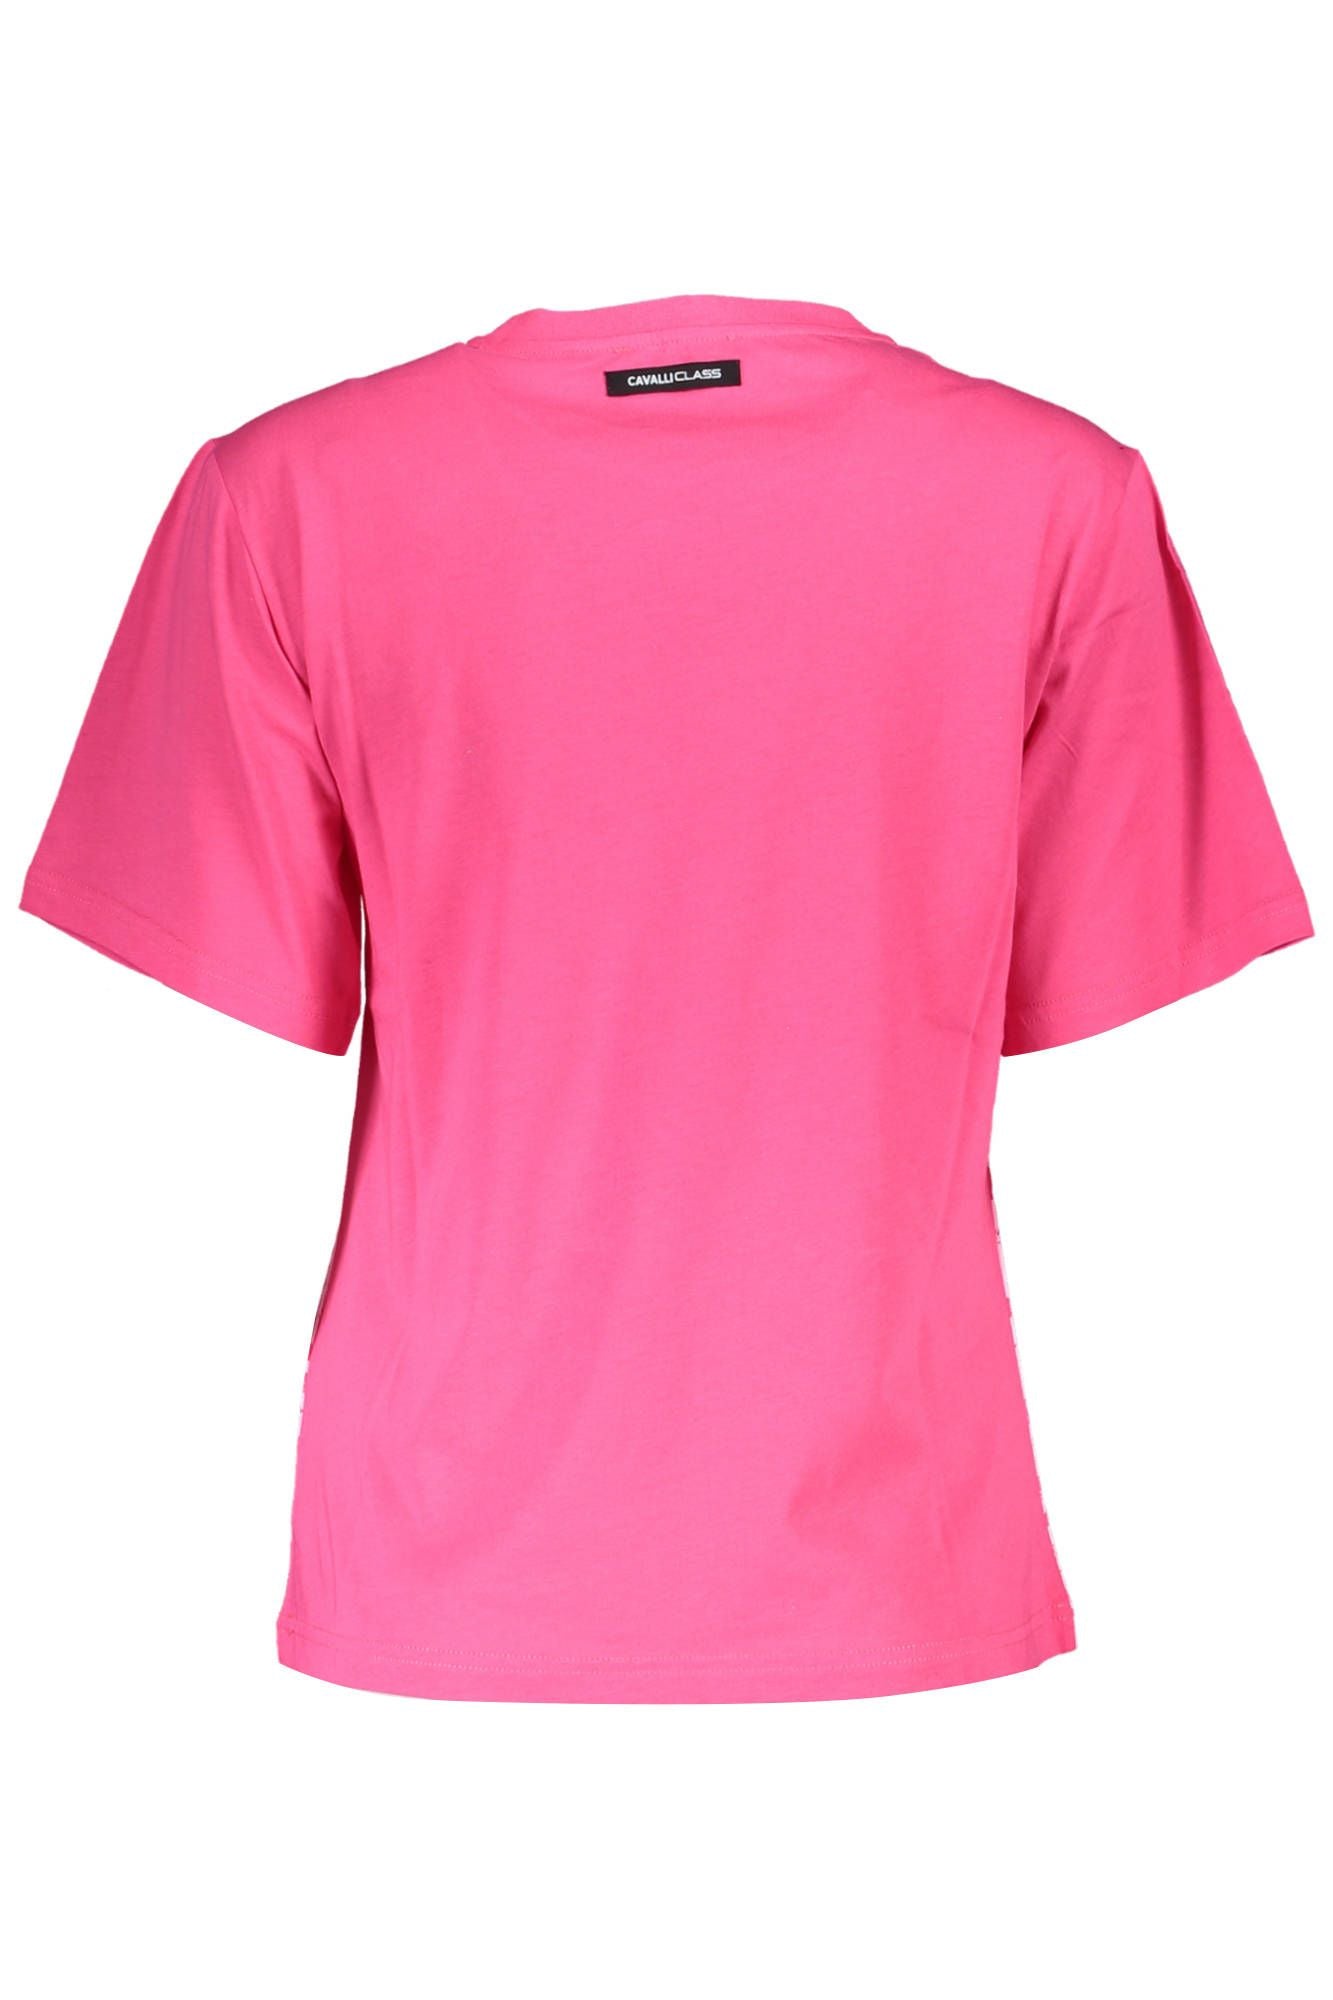 Chic Pink Cotton Tee with Logo Print